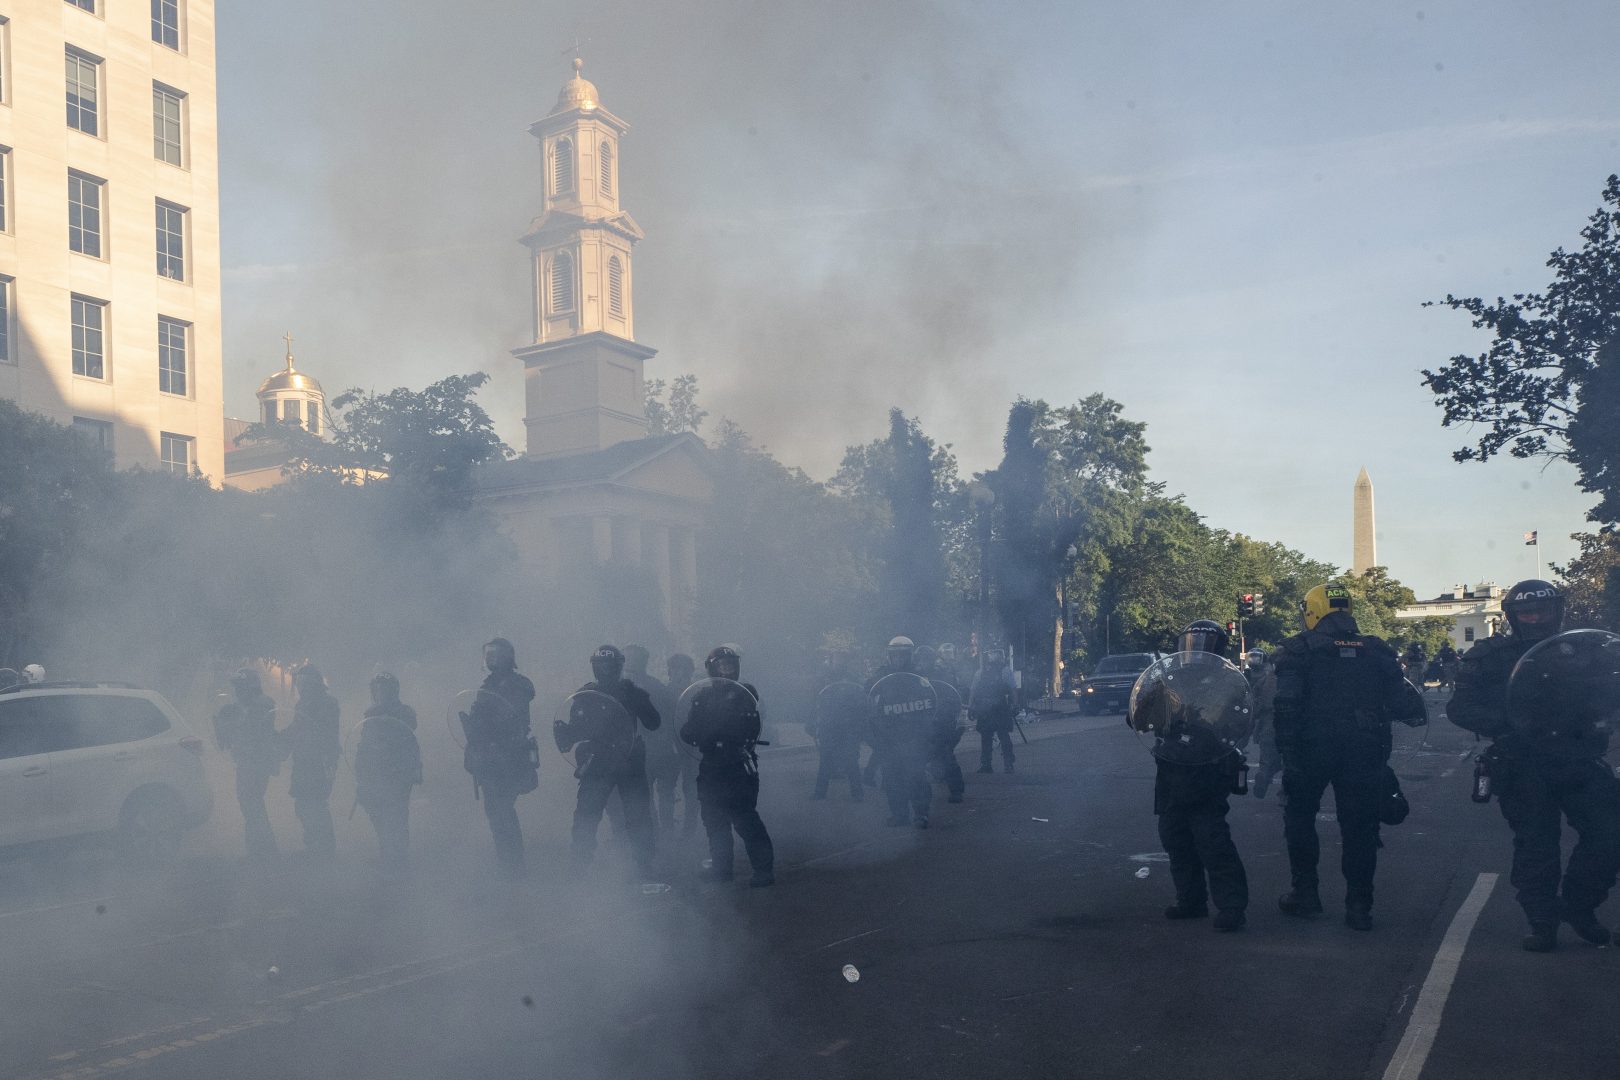 Tear gas floats in the air as a line of police move demonstrators away from St. John's Church across Lafayette Park from the White House, as they gather to protest the death of George Floyd, Monday, June 1, 2020, in Washington. Floyd died after being restrained by Minneapolis police officers.